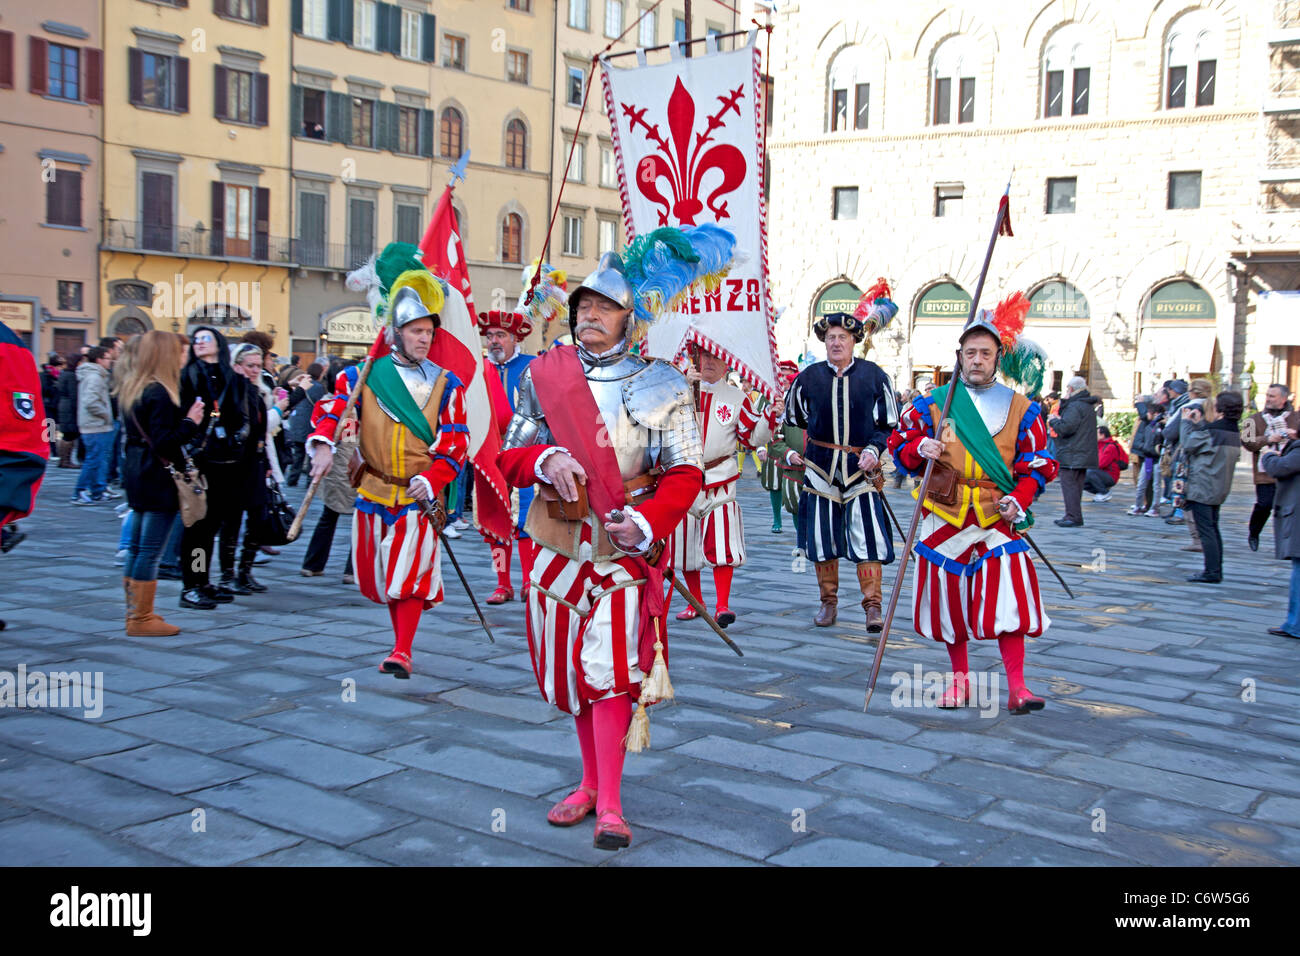 Men parading in traditional costume through the streets of Florence Italy. Stock Photo